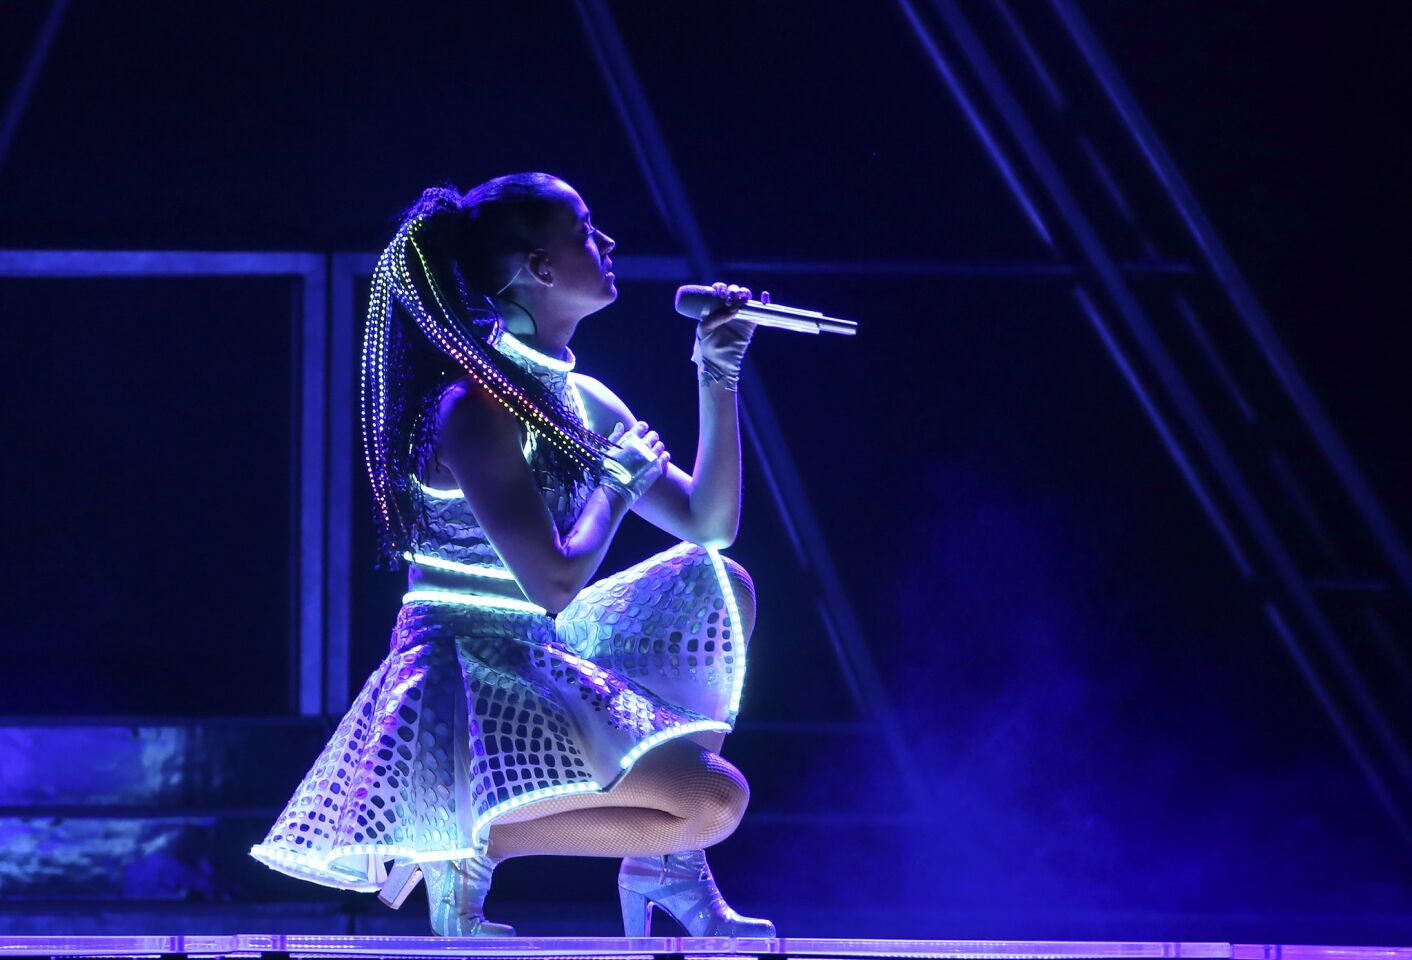 Katy Perry gets low mid-performance at a Philadelphia concert that was part of her Prismatic World Tour.